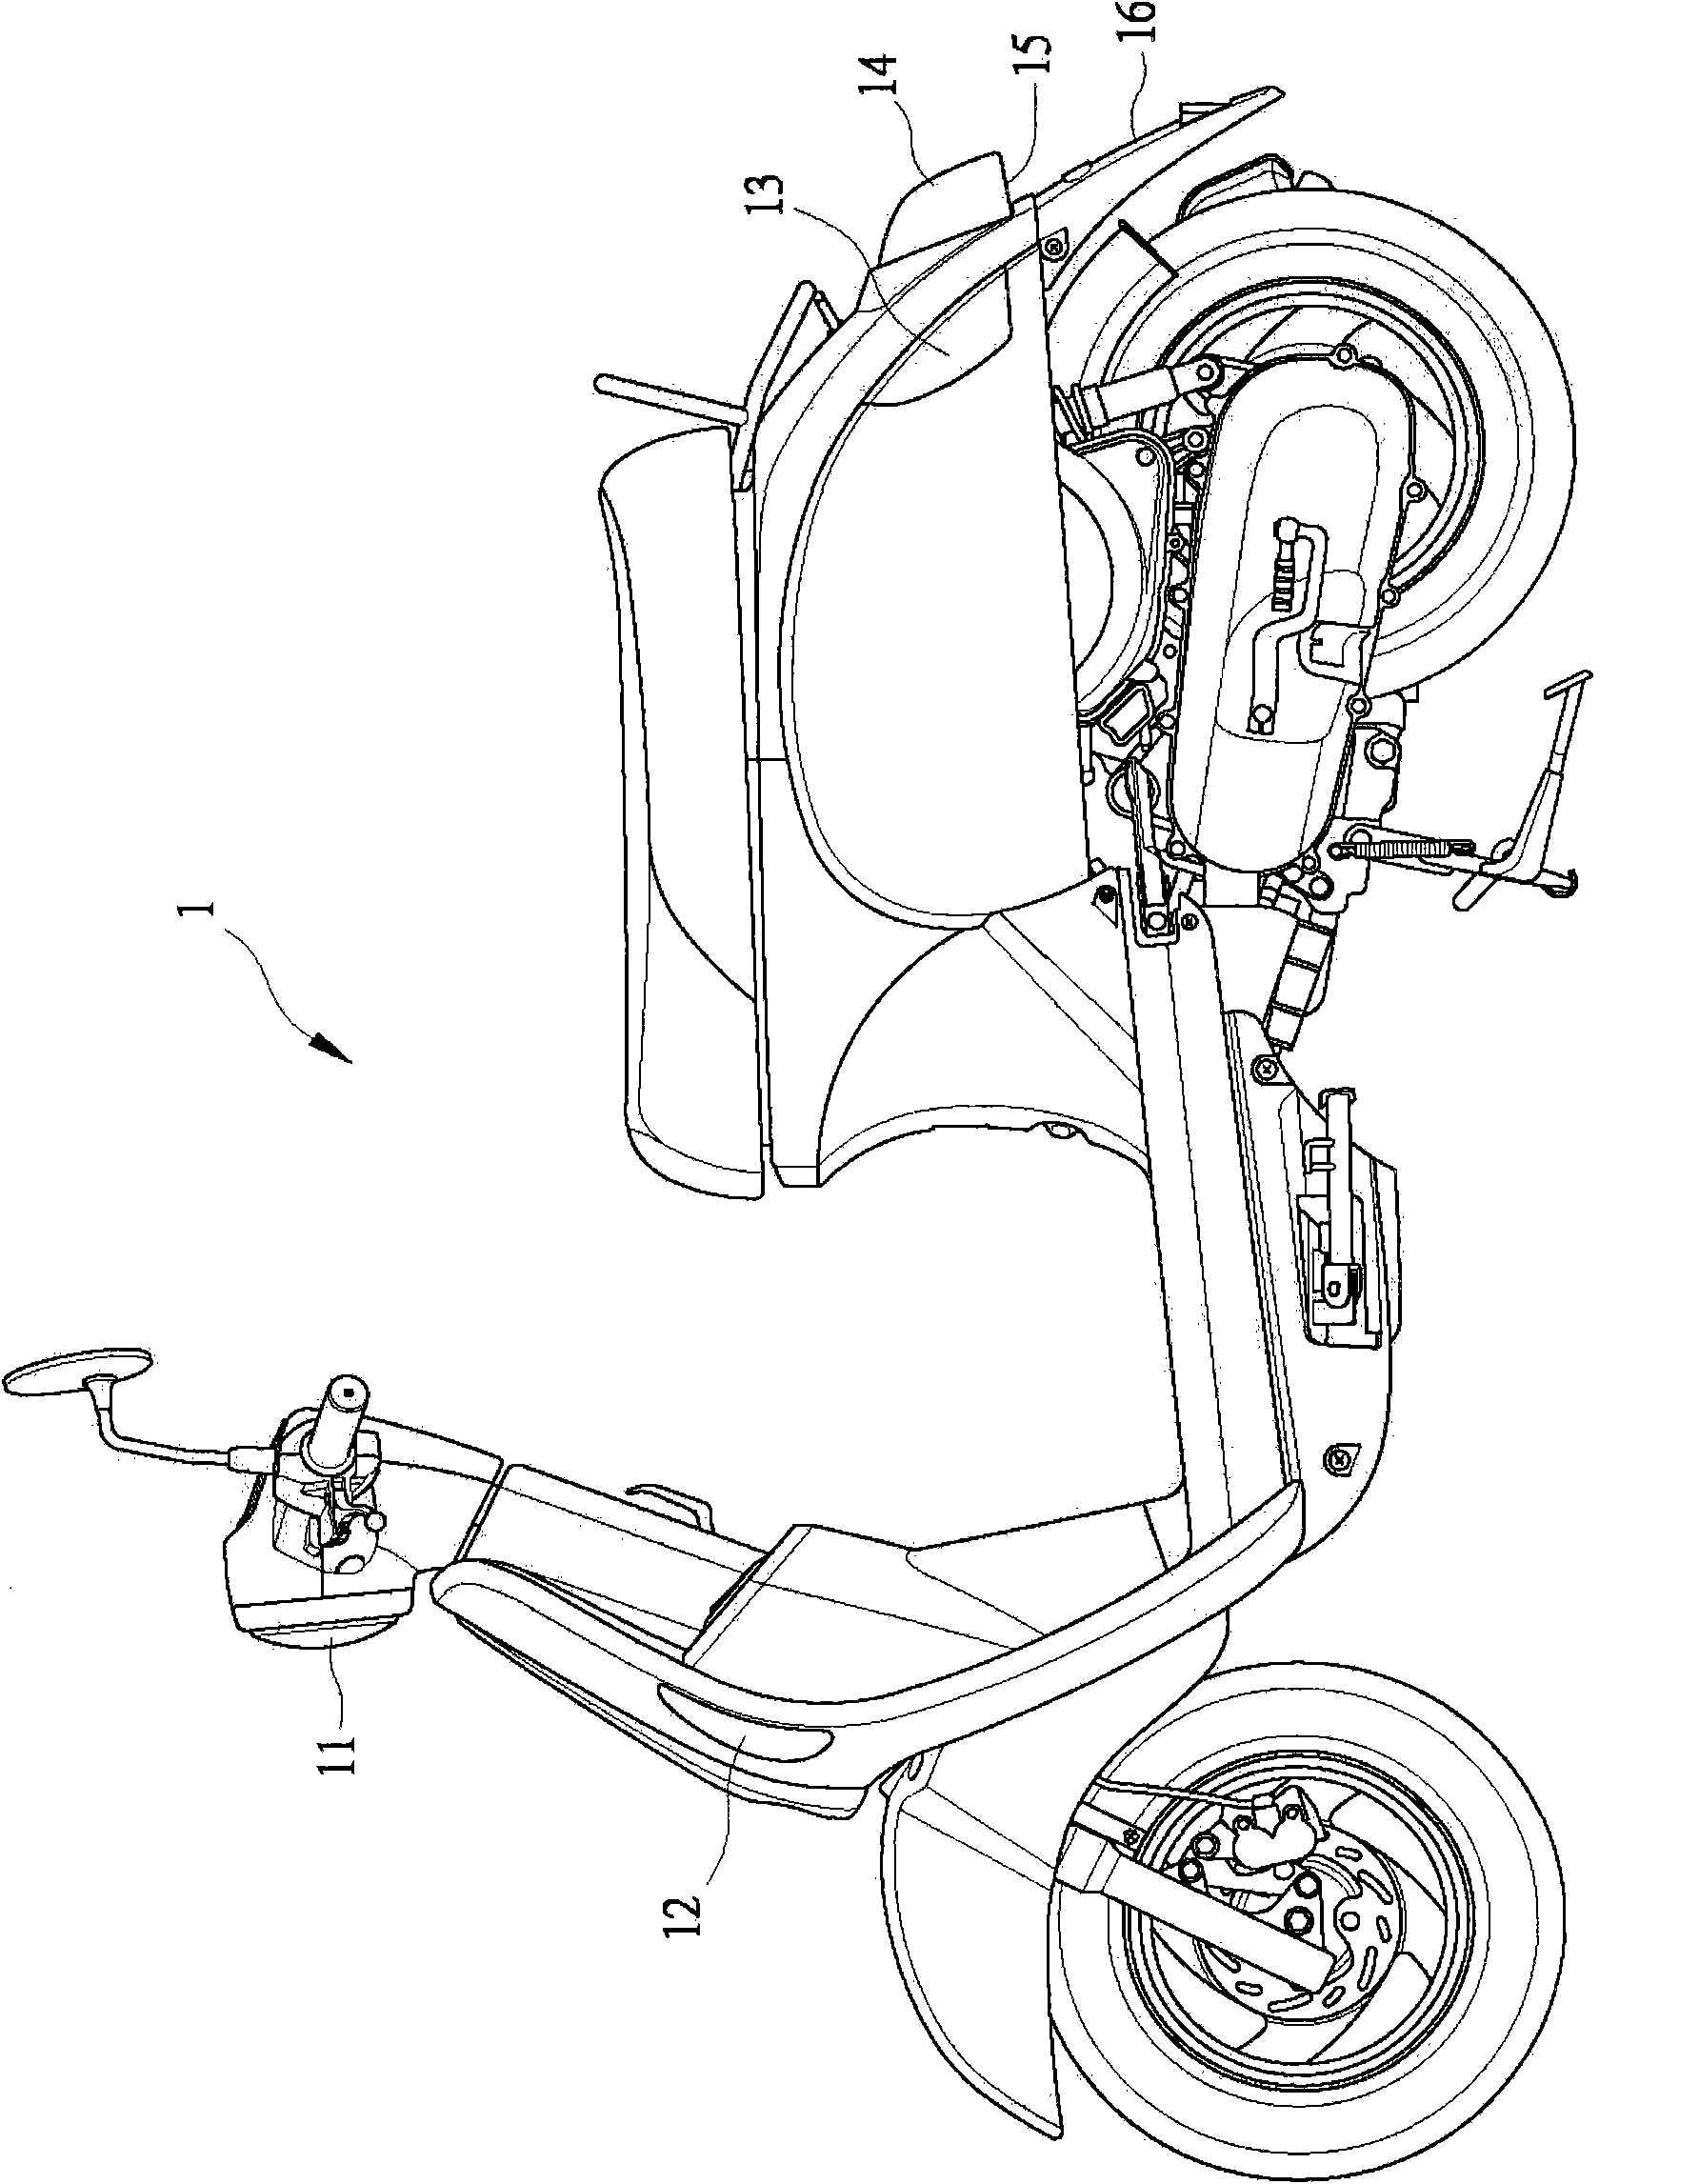 Structure of rear lamp of motorcycle